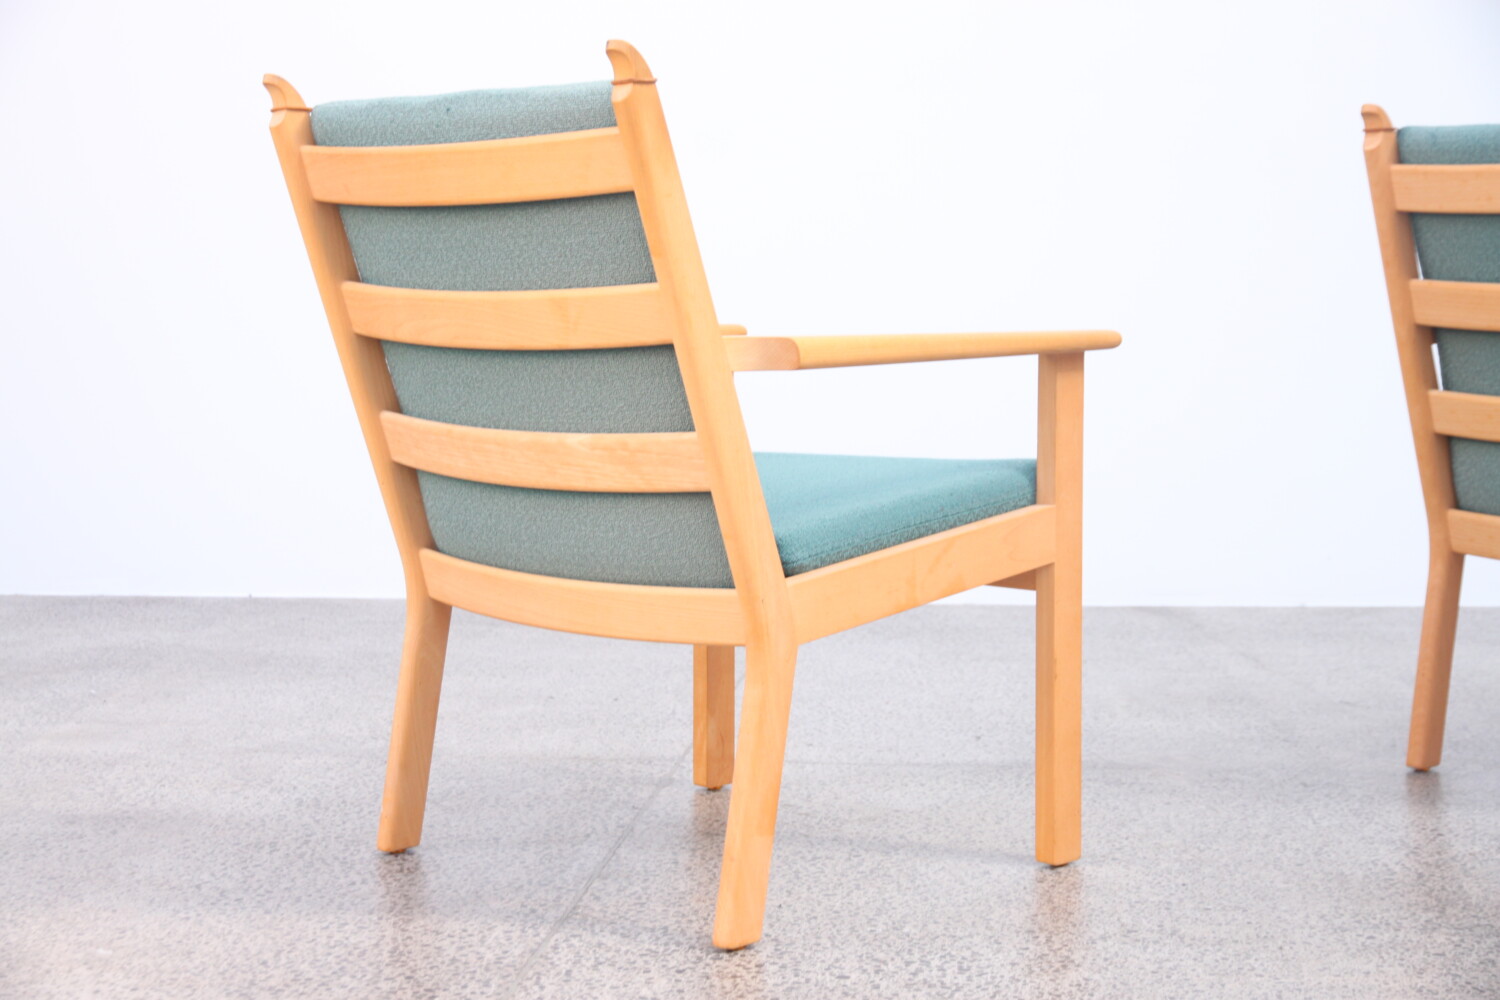 Pair of chairs by Hans Wegner